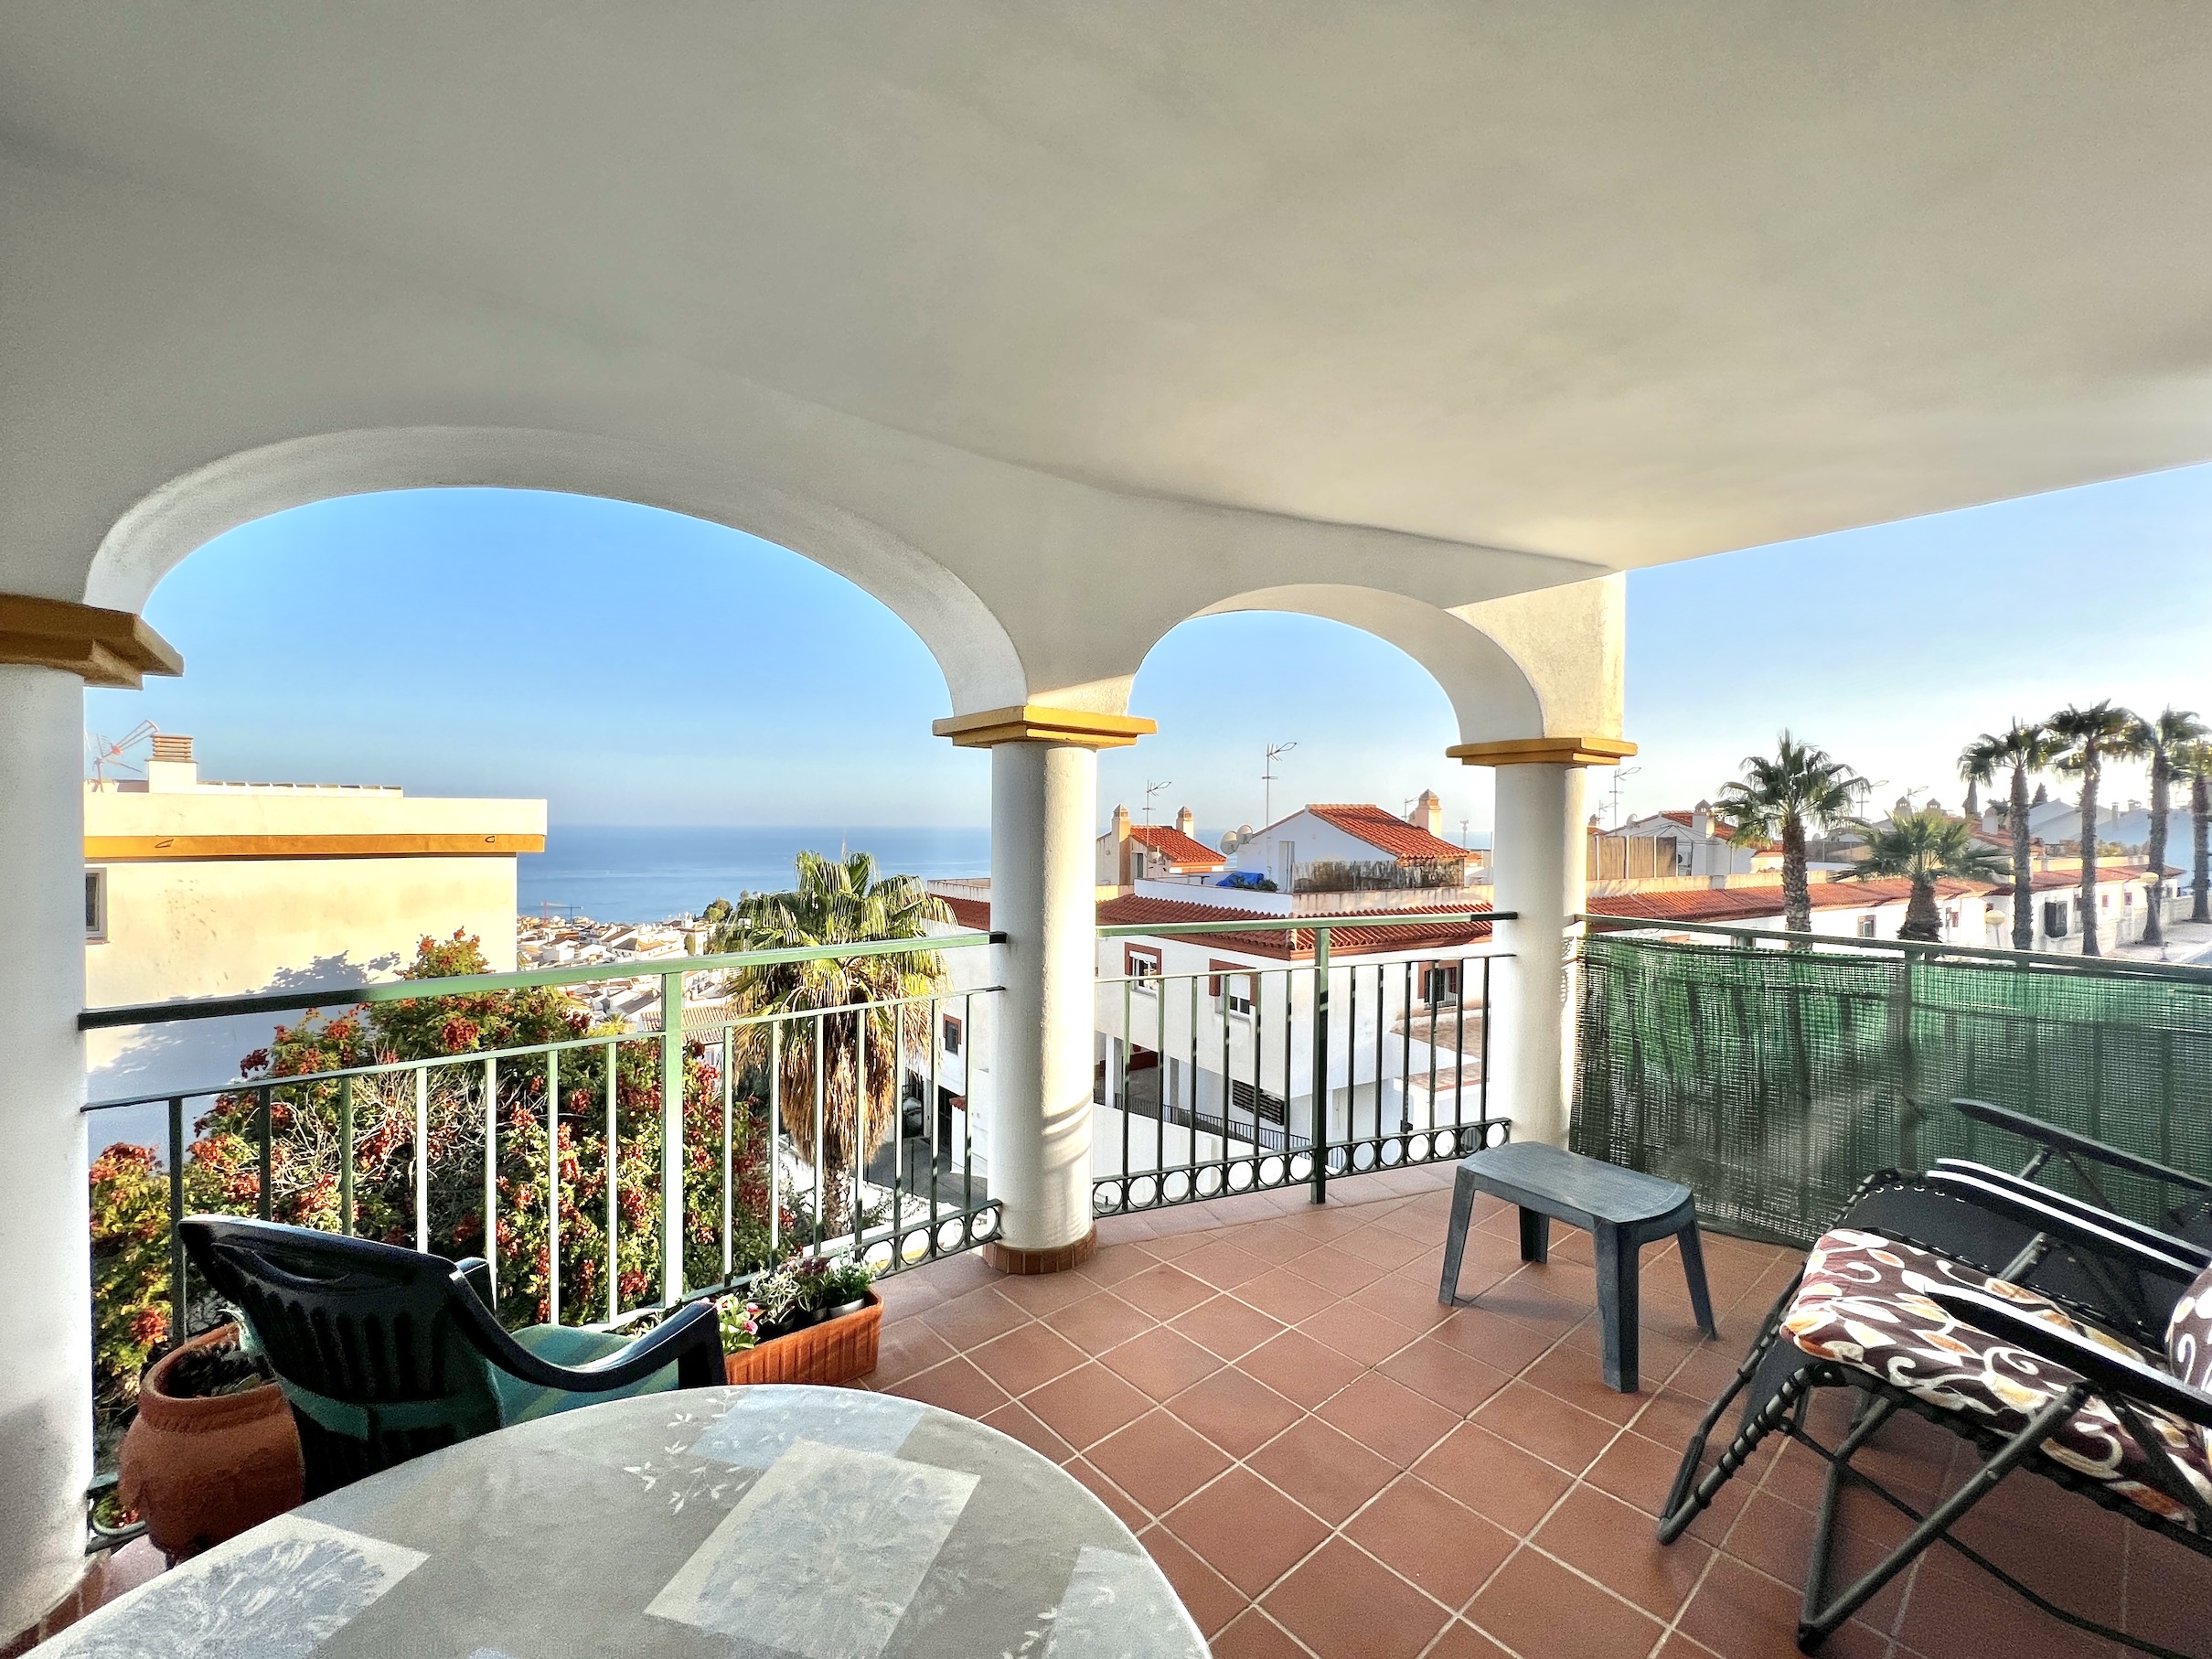 Incredible Views from this Beautifully Maintained Three-Bedroom Flat in Piso Aljarafe – Benalmadena Pueblo